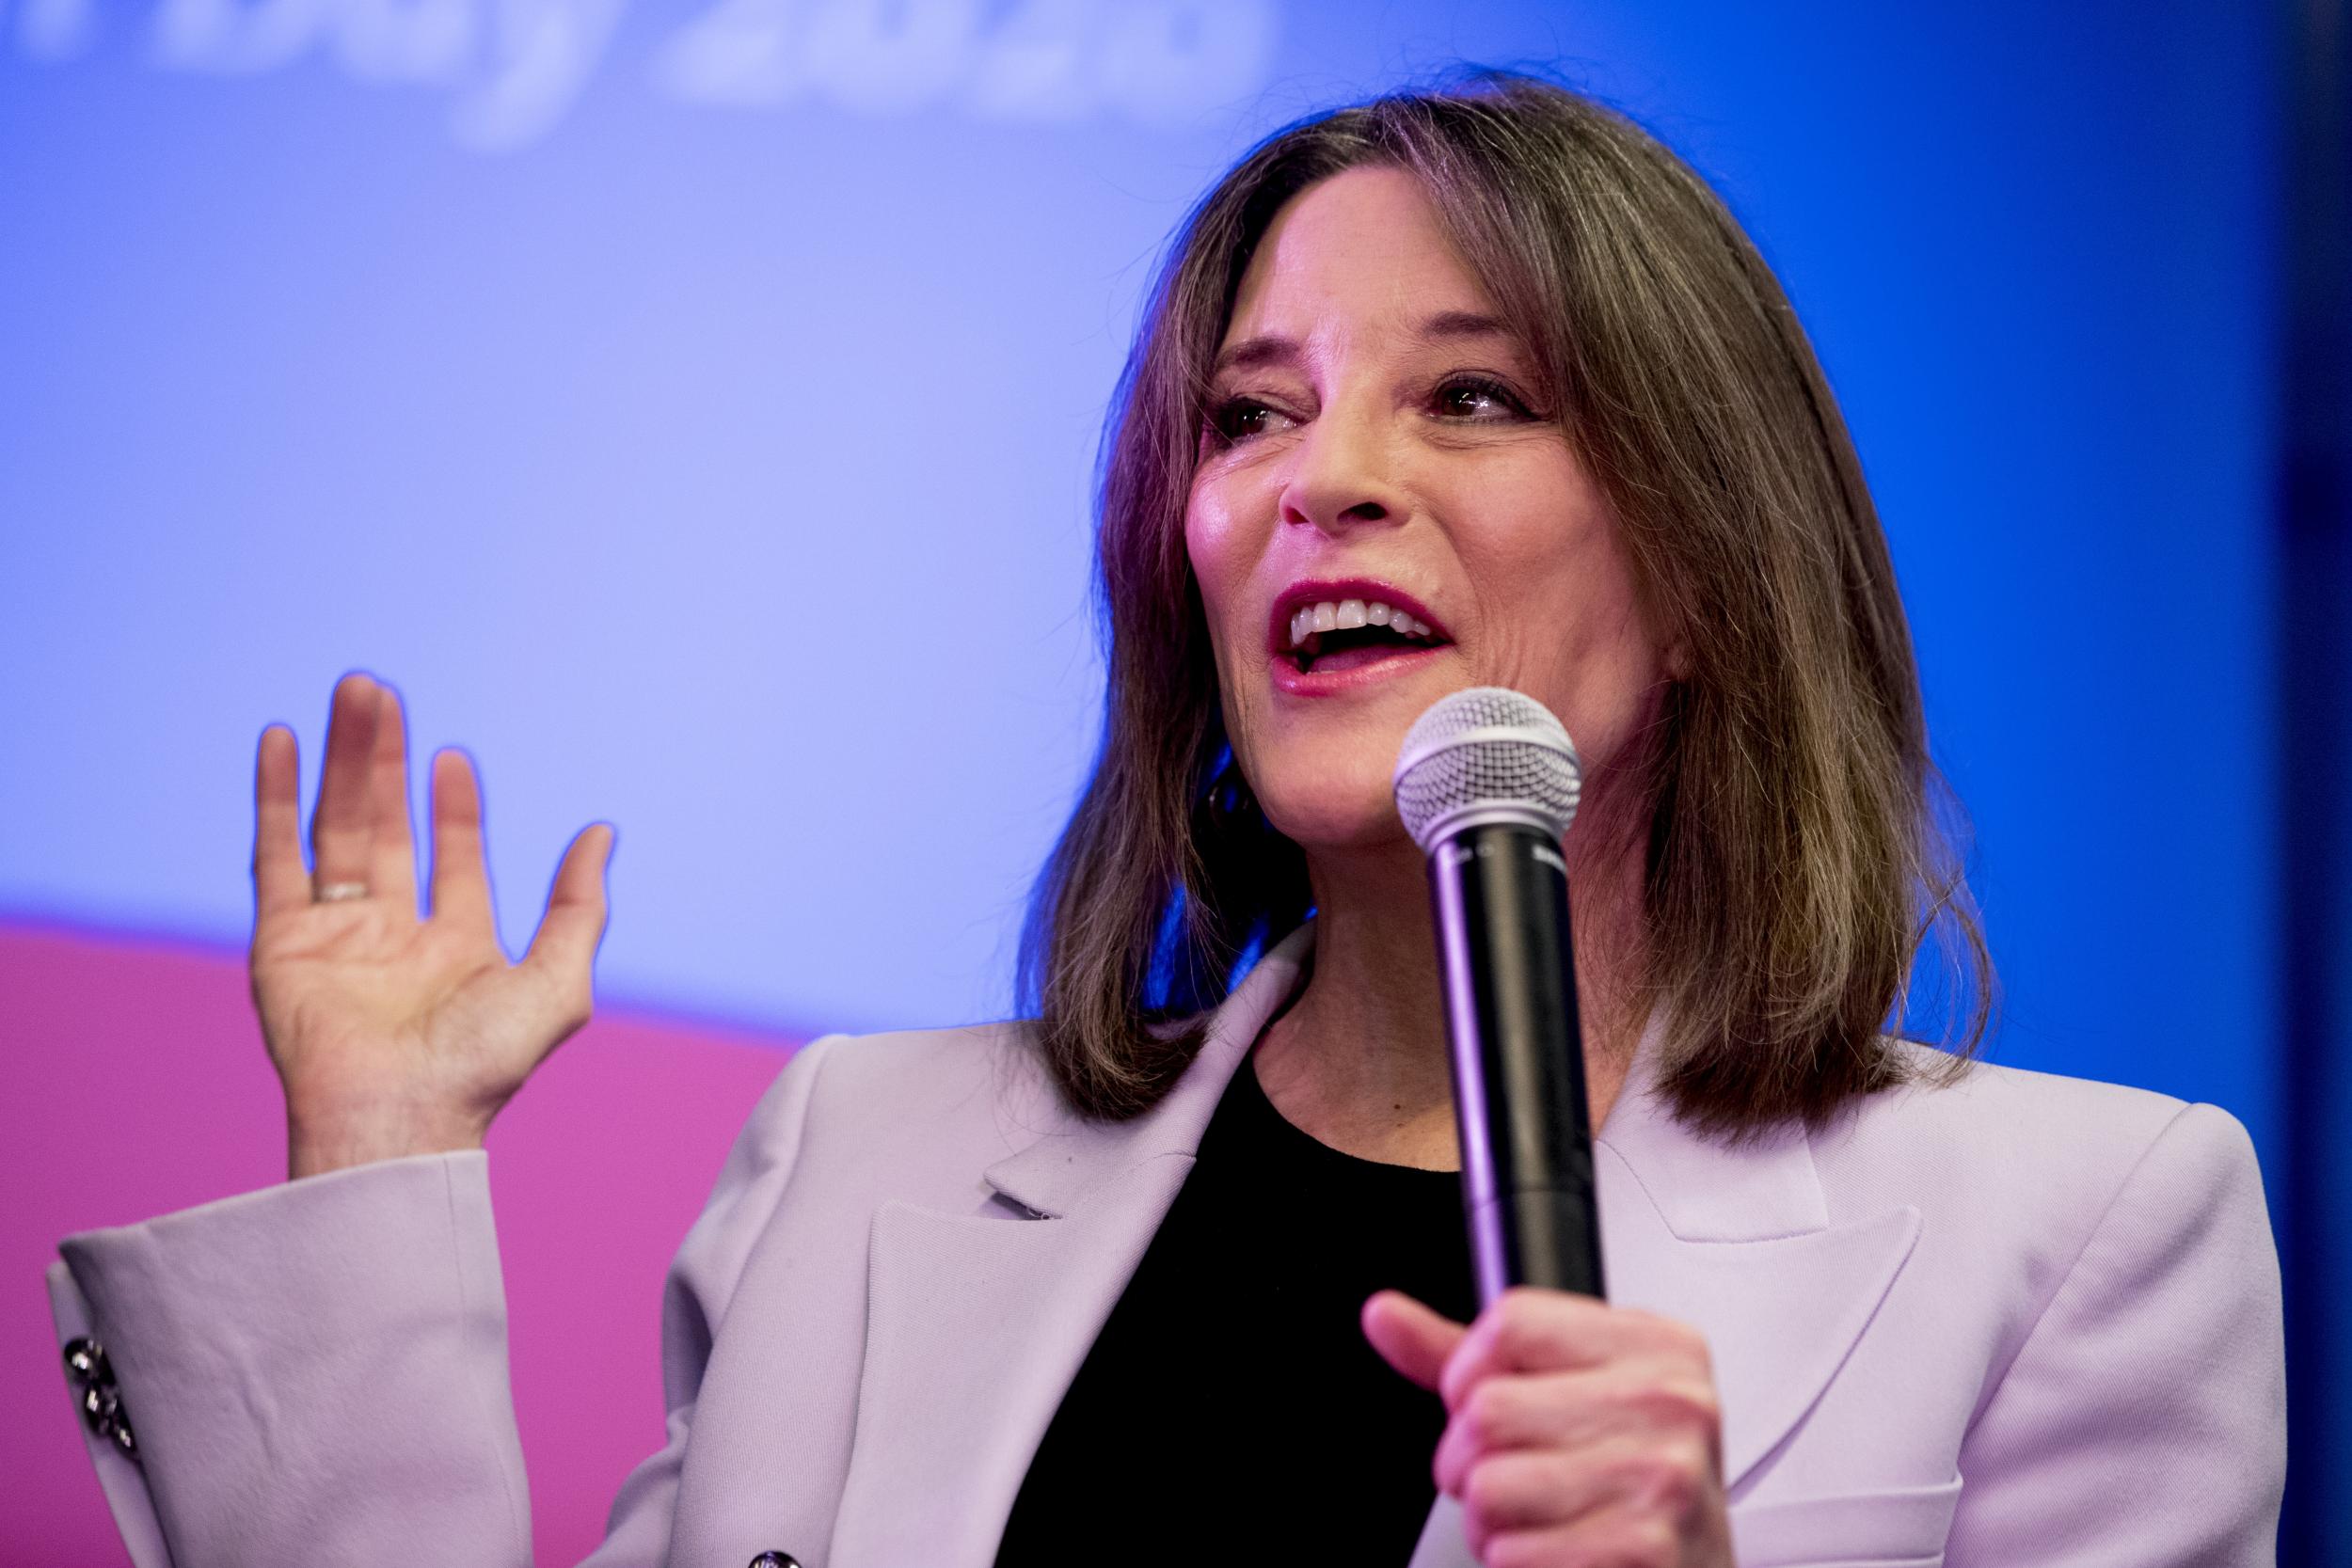 Marianne Williamson, who now supports Bernie Sanders, called Joe Biden's surge on Super Tuesday a Democratic "coup"